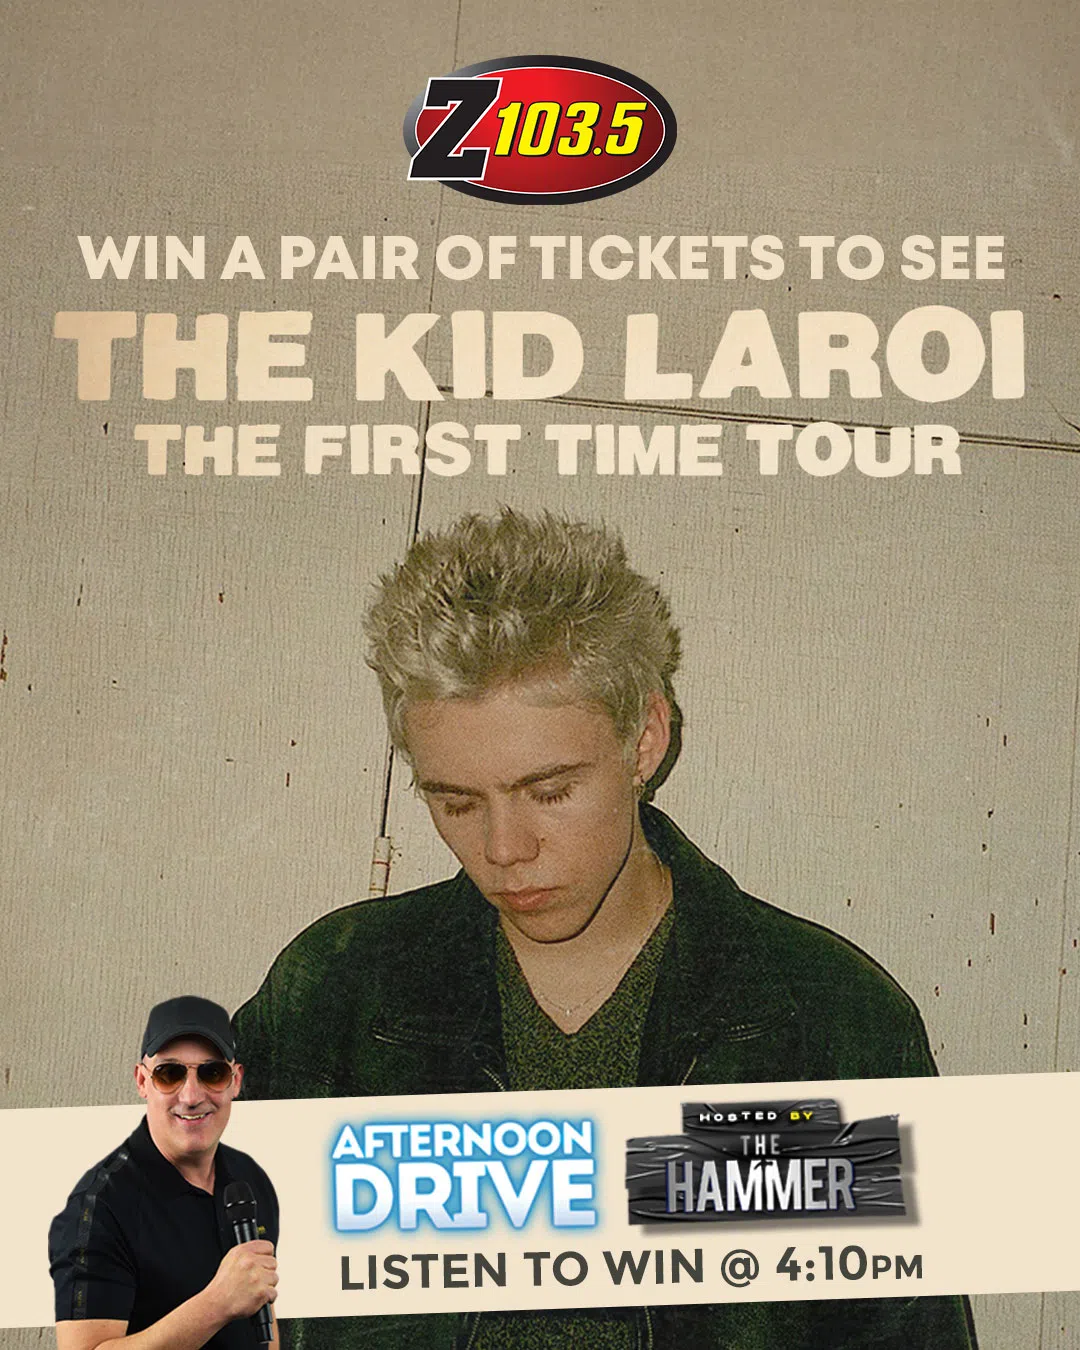 Feature: https://z1035.com/win/win-tickets-to-see-kid-laroi/